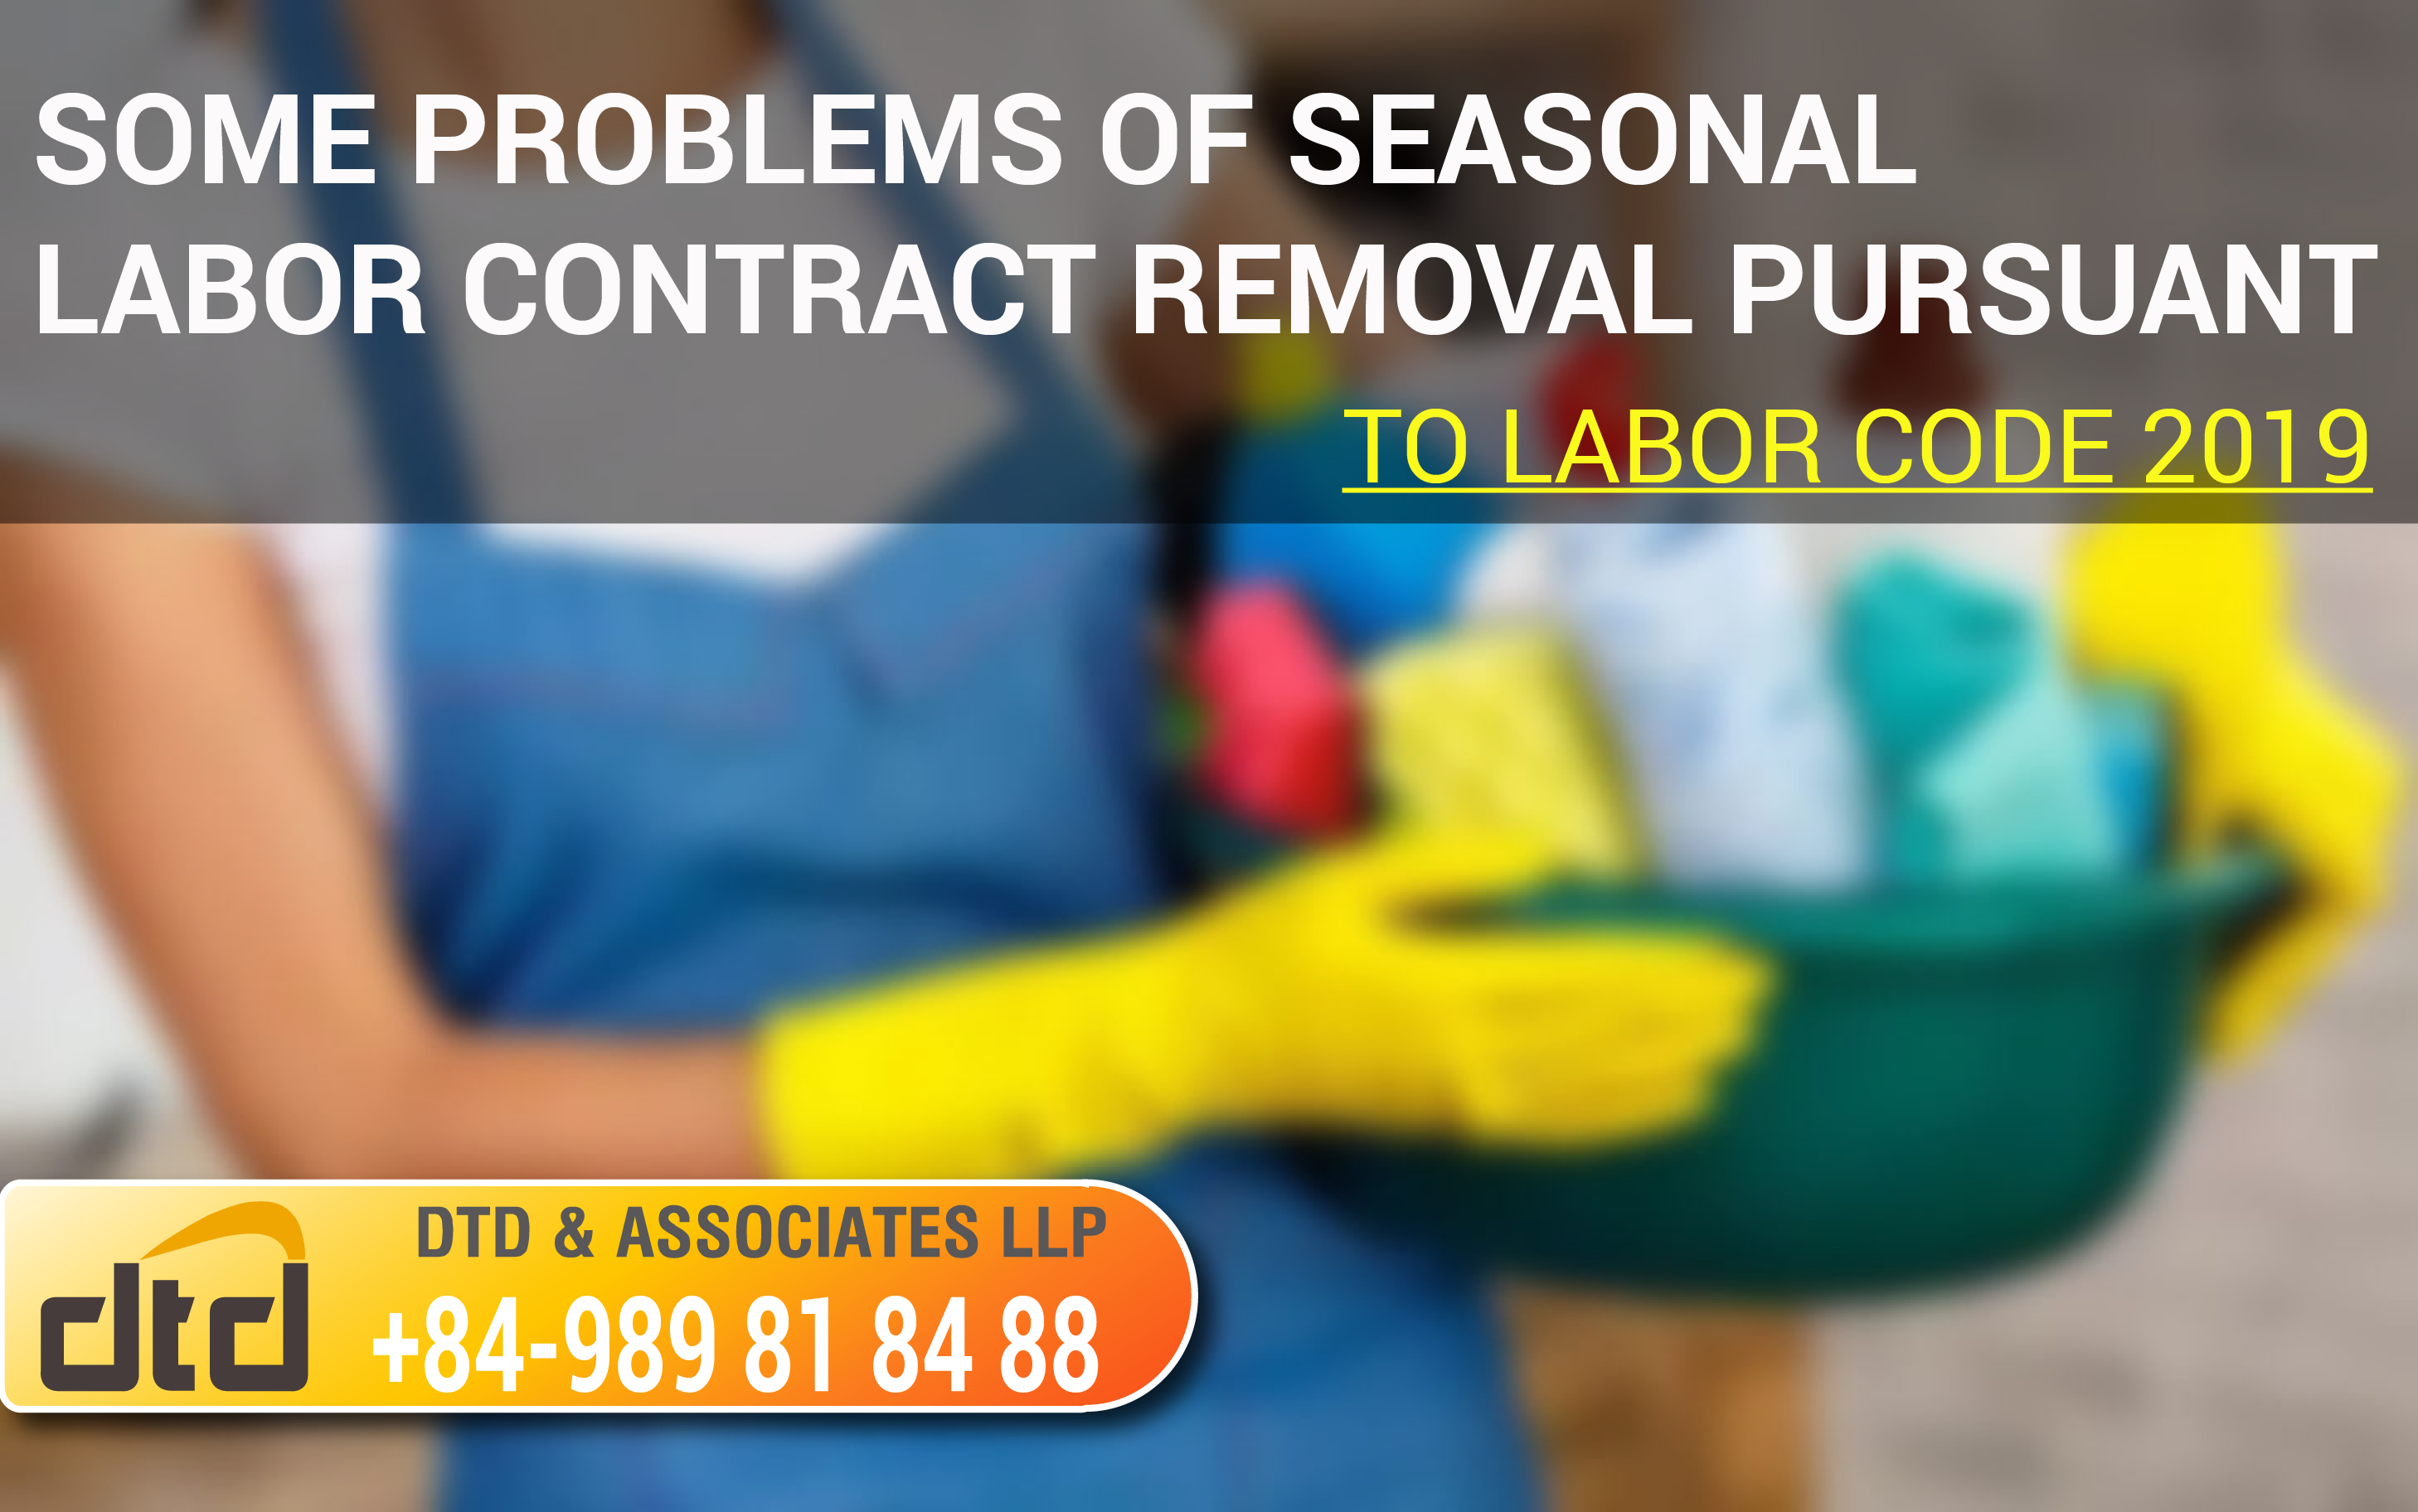 SOME PROBLEMS OF SEASONAL LABOR CONTRACT REMOVAL PURSUANT TO LABOR CODE 2019